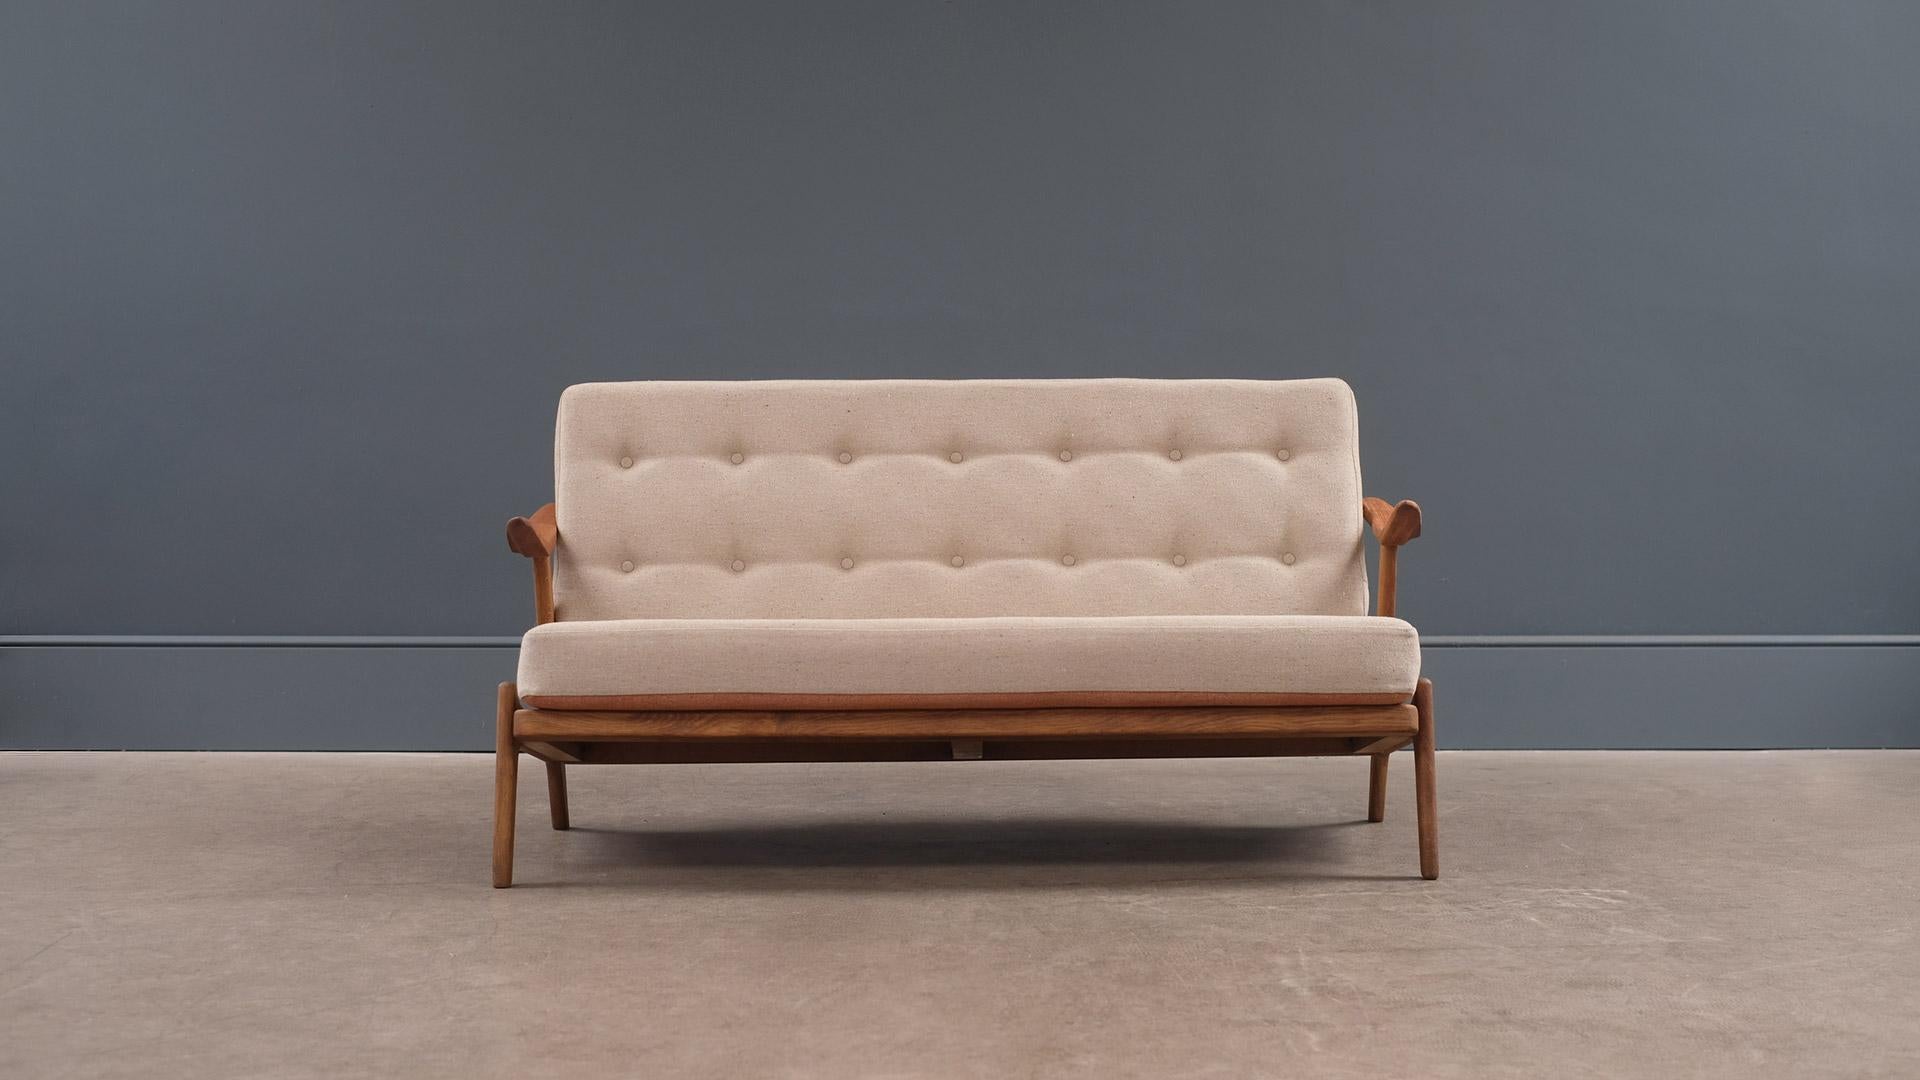 Very nice sofa in solid oak with teak arms designed by Hans Brockmann-Petersen for Randers, 1955, Denmark. Original sprung cushions full refurbished and reupholstered in reversible Fleck fabric.